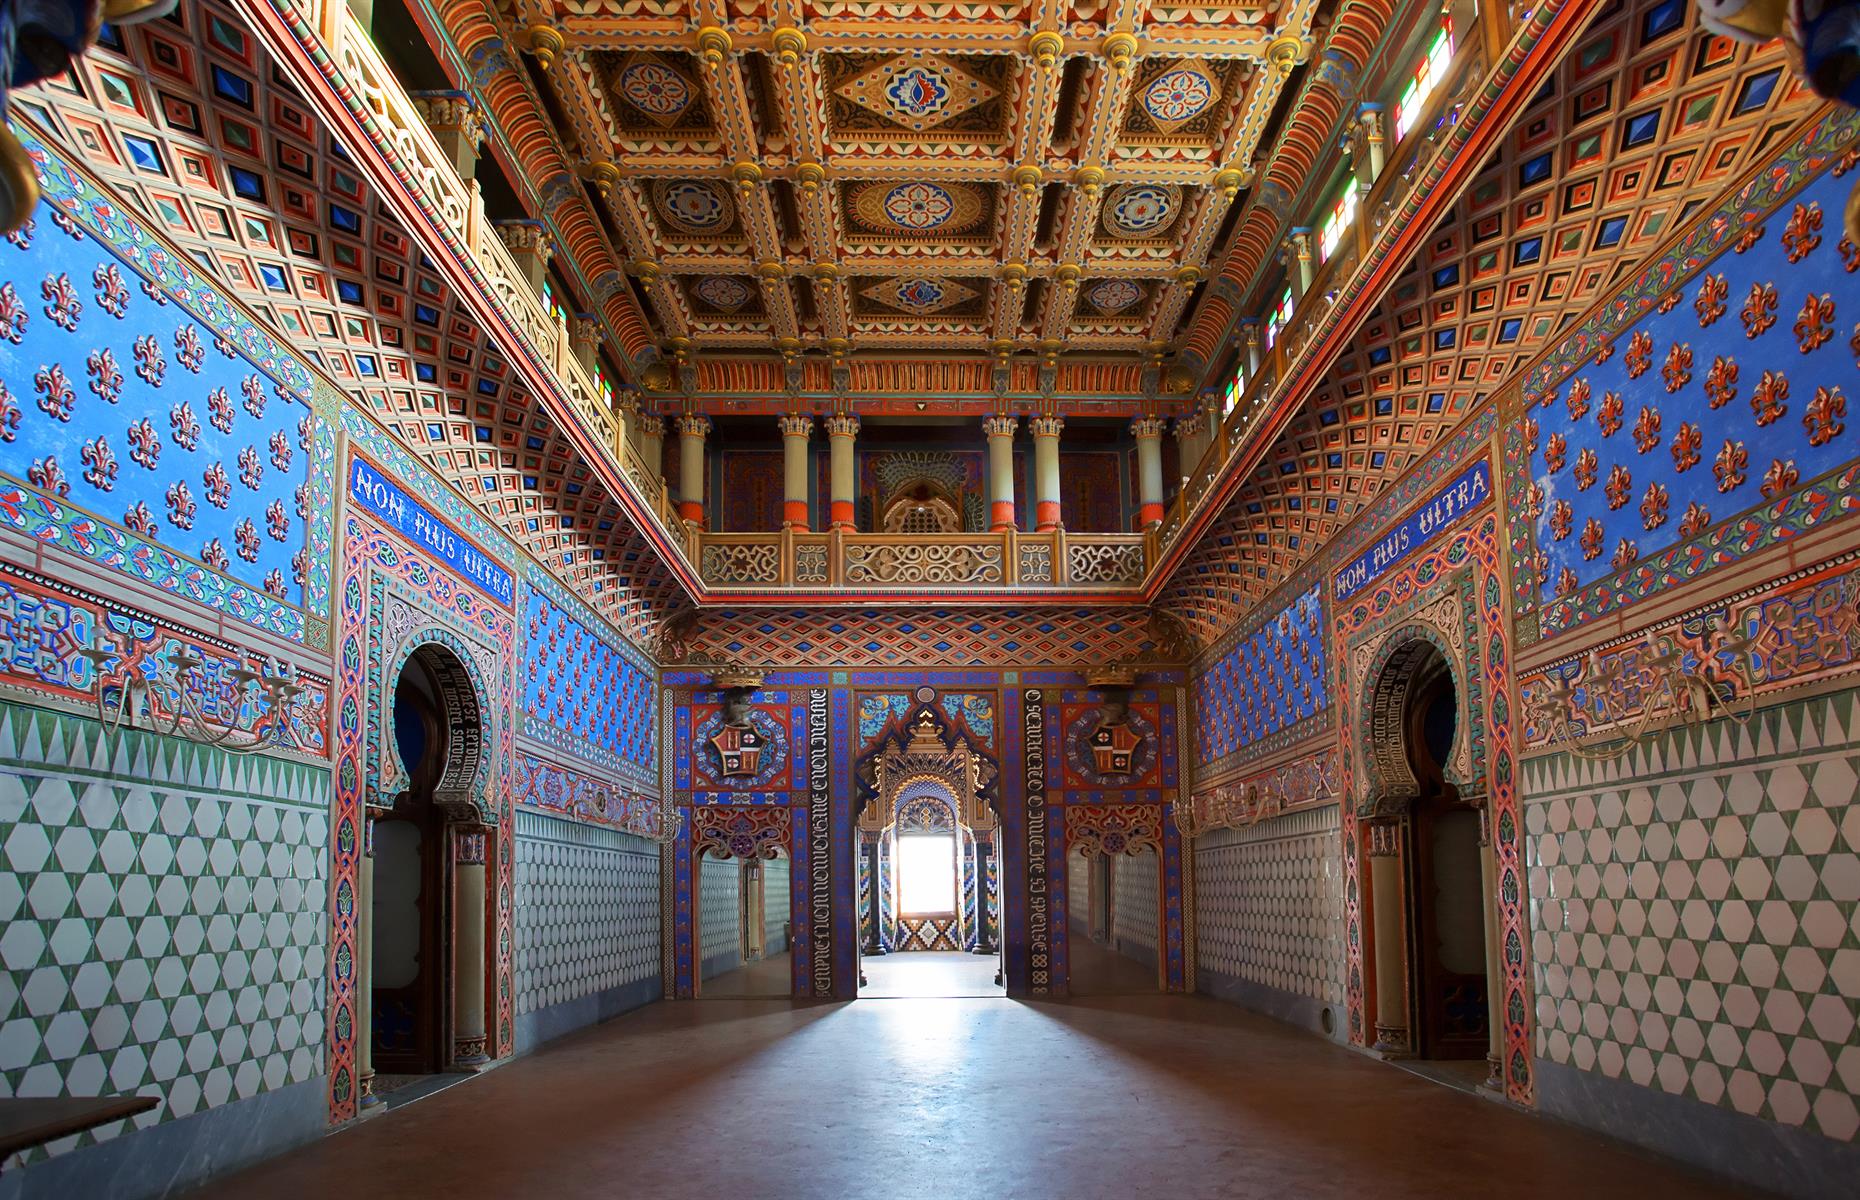 <p>Since the 1990s, the palace has been owned by the same Italo-British company, Sammezzano Castle Srl, who intended to reopen the castle as a five-star luxury hotel. After several failed attempts at fundraising, a conservation group called Save Sammezzano took on the project. And not a day too soon, the years of neglect were starting to take their toll on this precious building.</p>